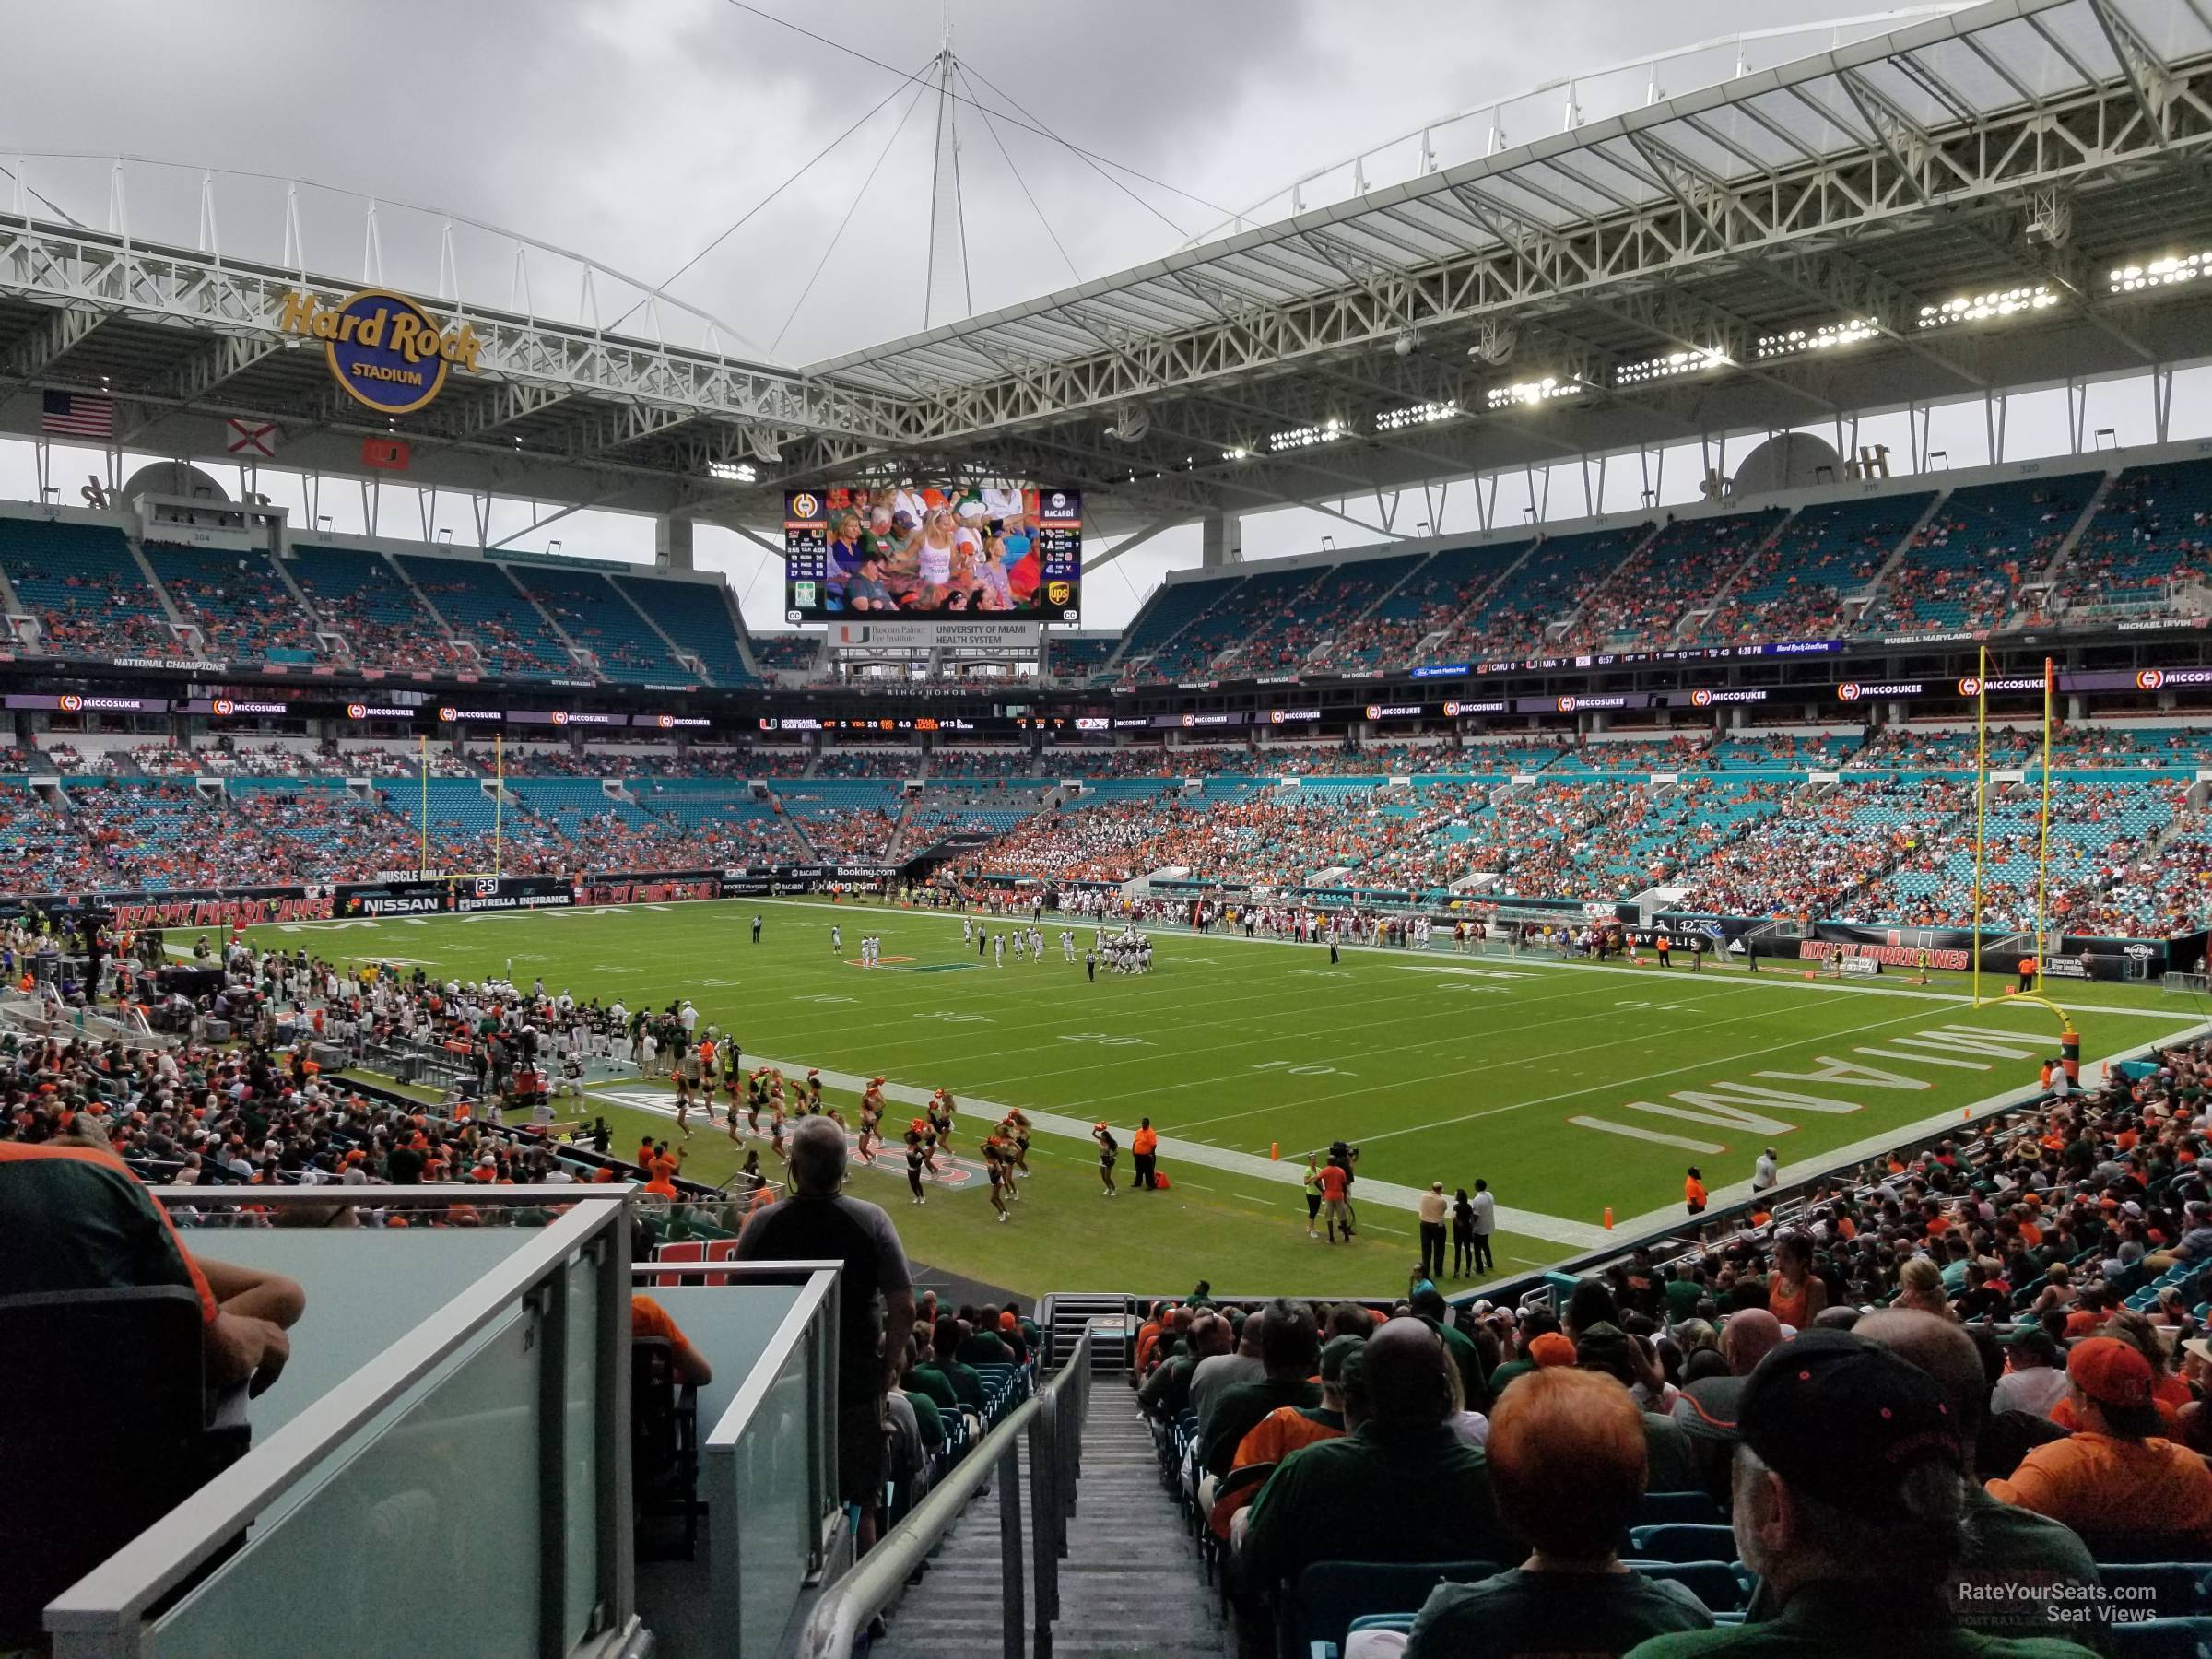 section 138 at hard rock stadium - miami dolphins